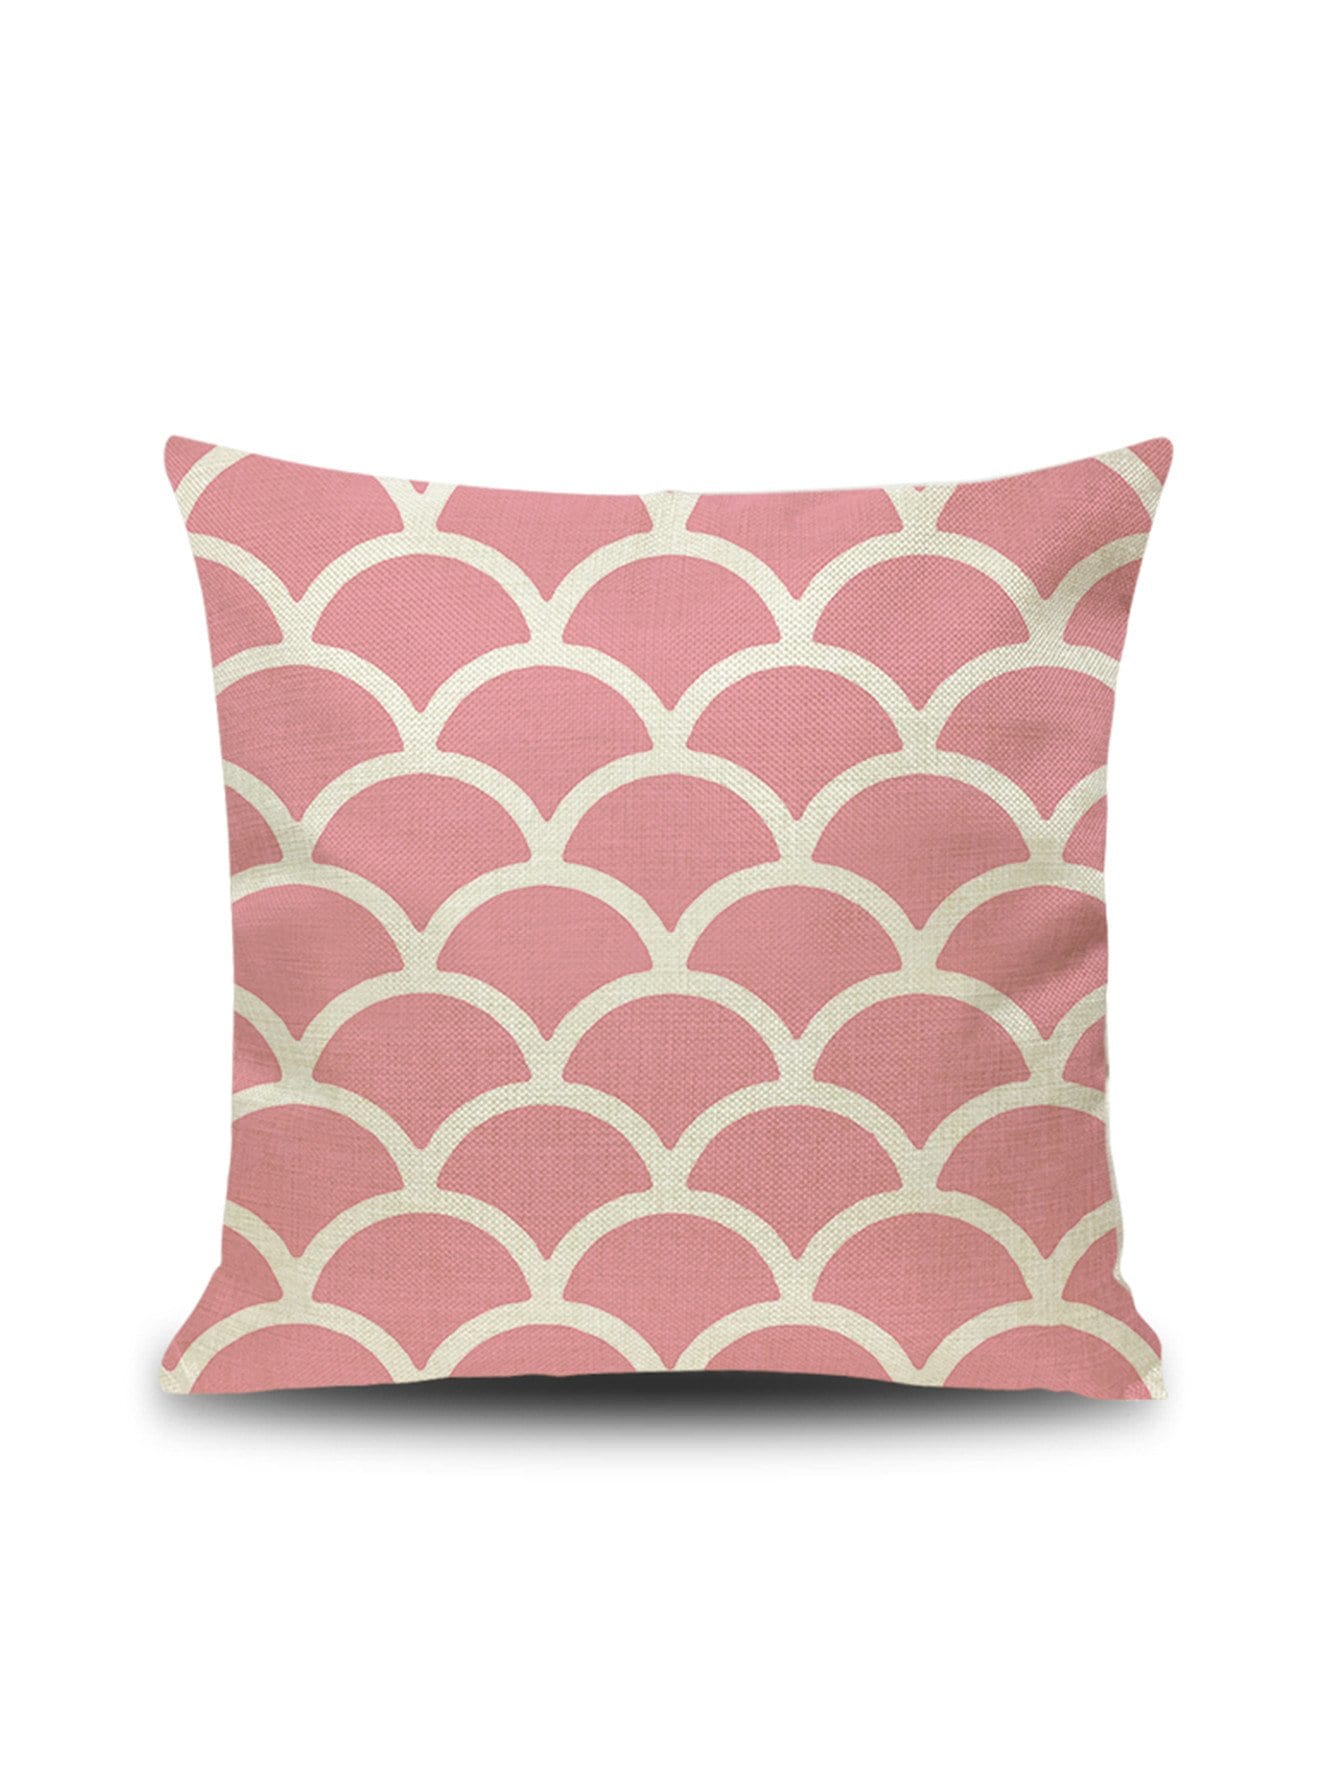 Scale Pattern Cushion Cover